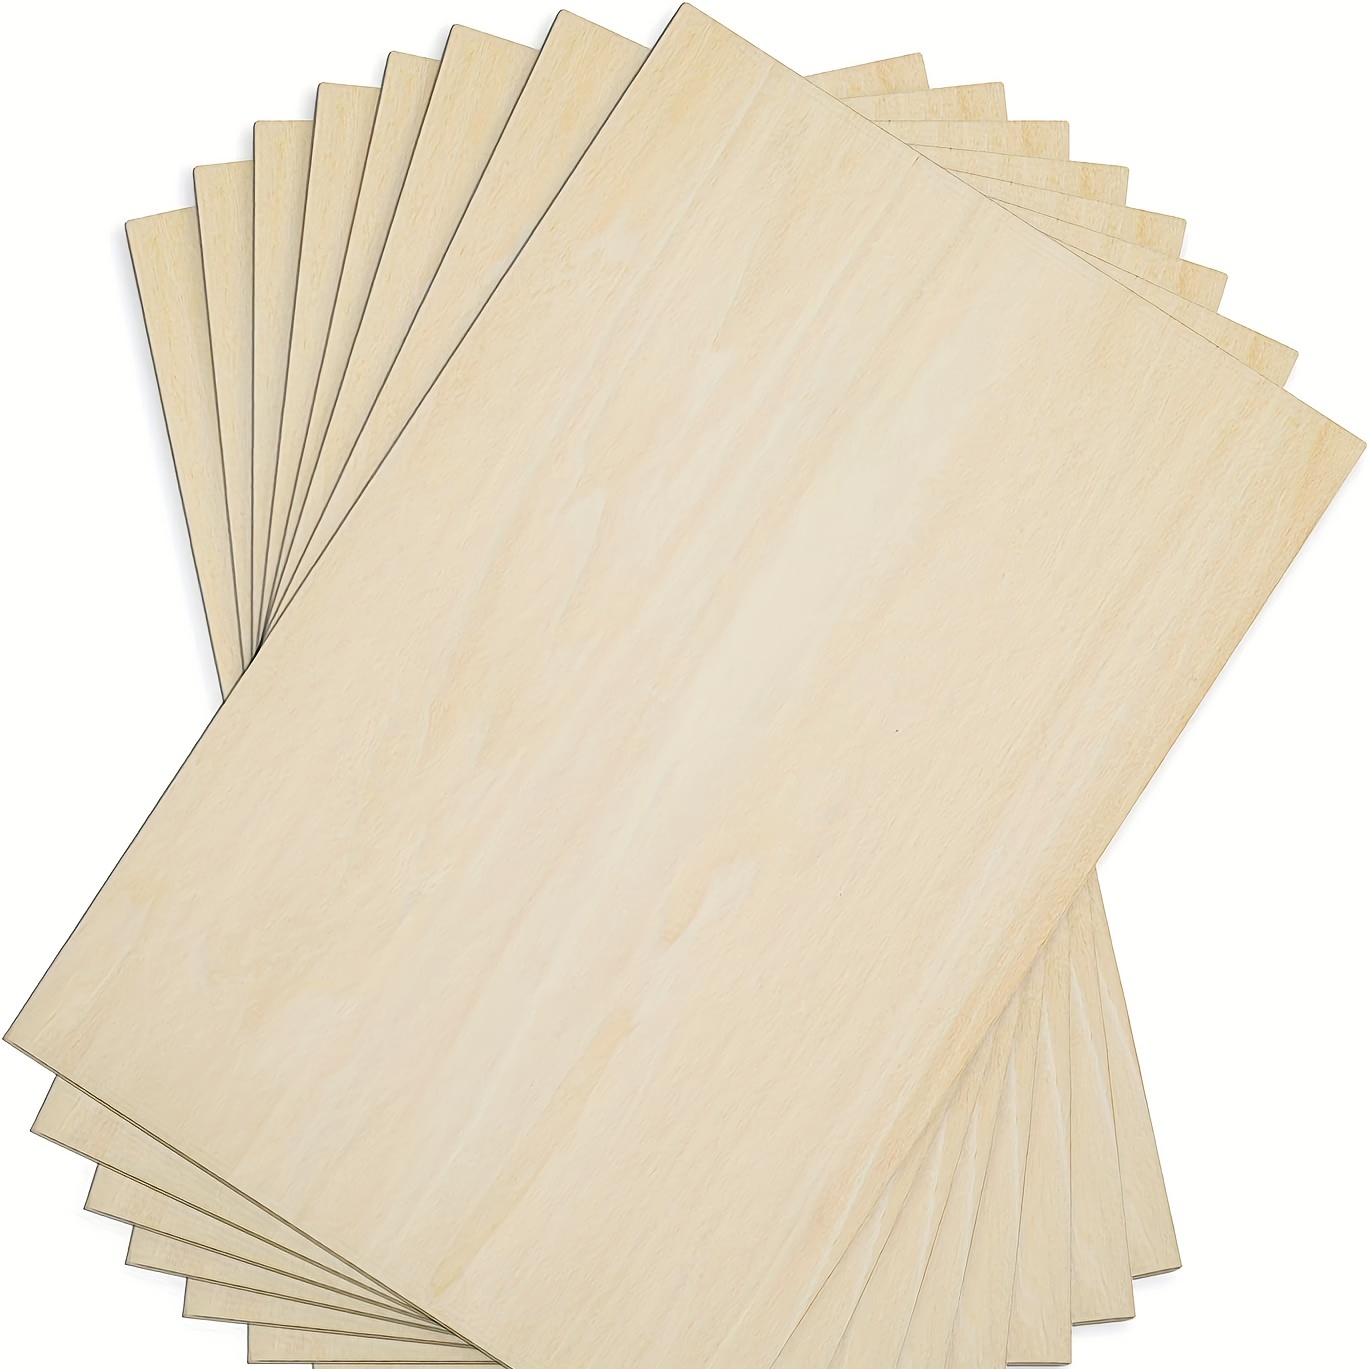 10Pcs Craft Cutting Board Wood Craft Supplies Wooden Boards for